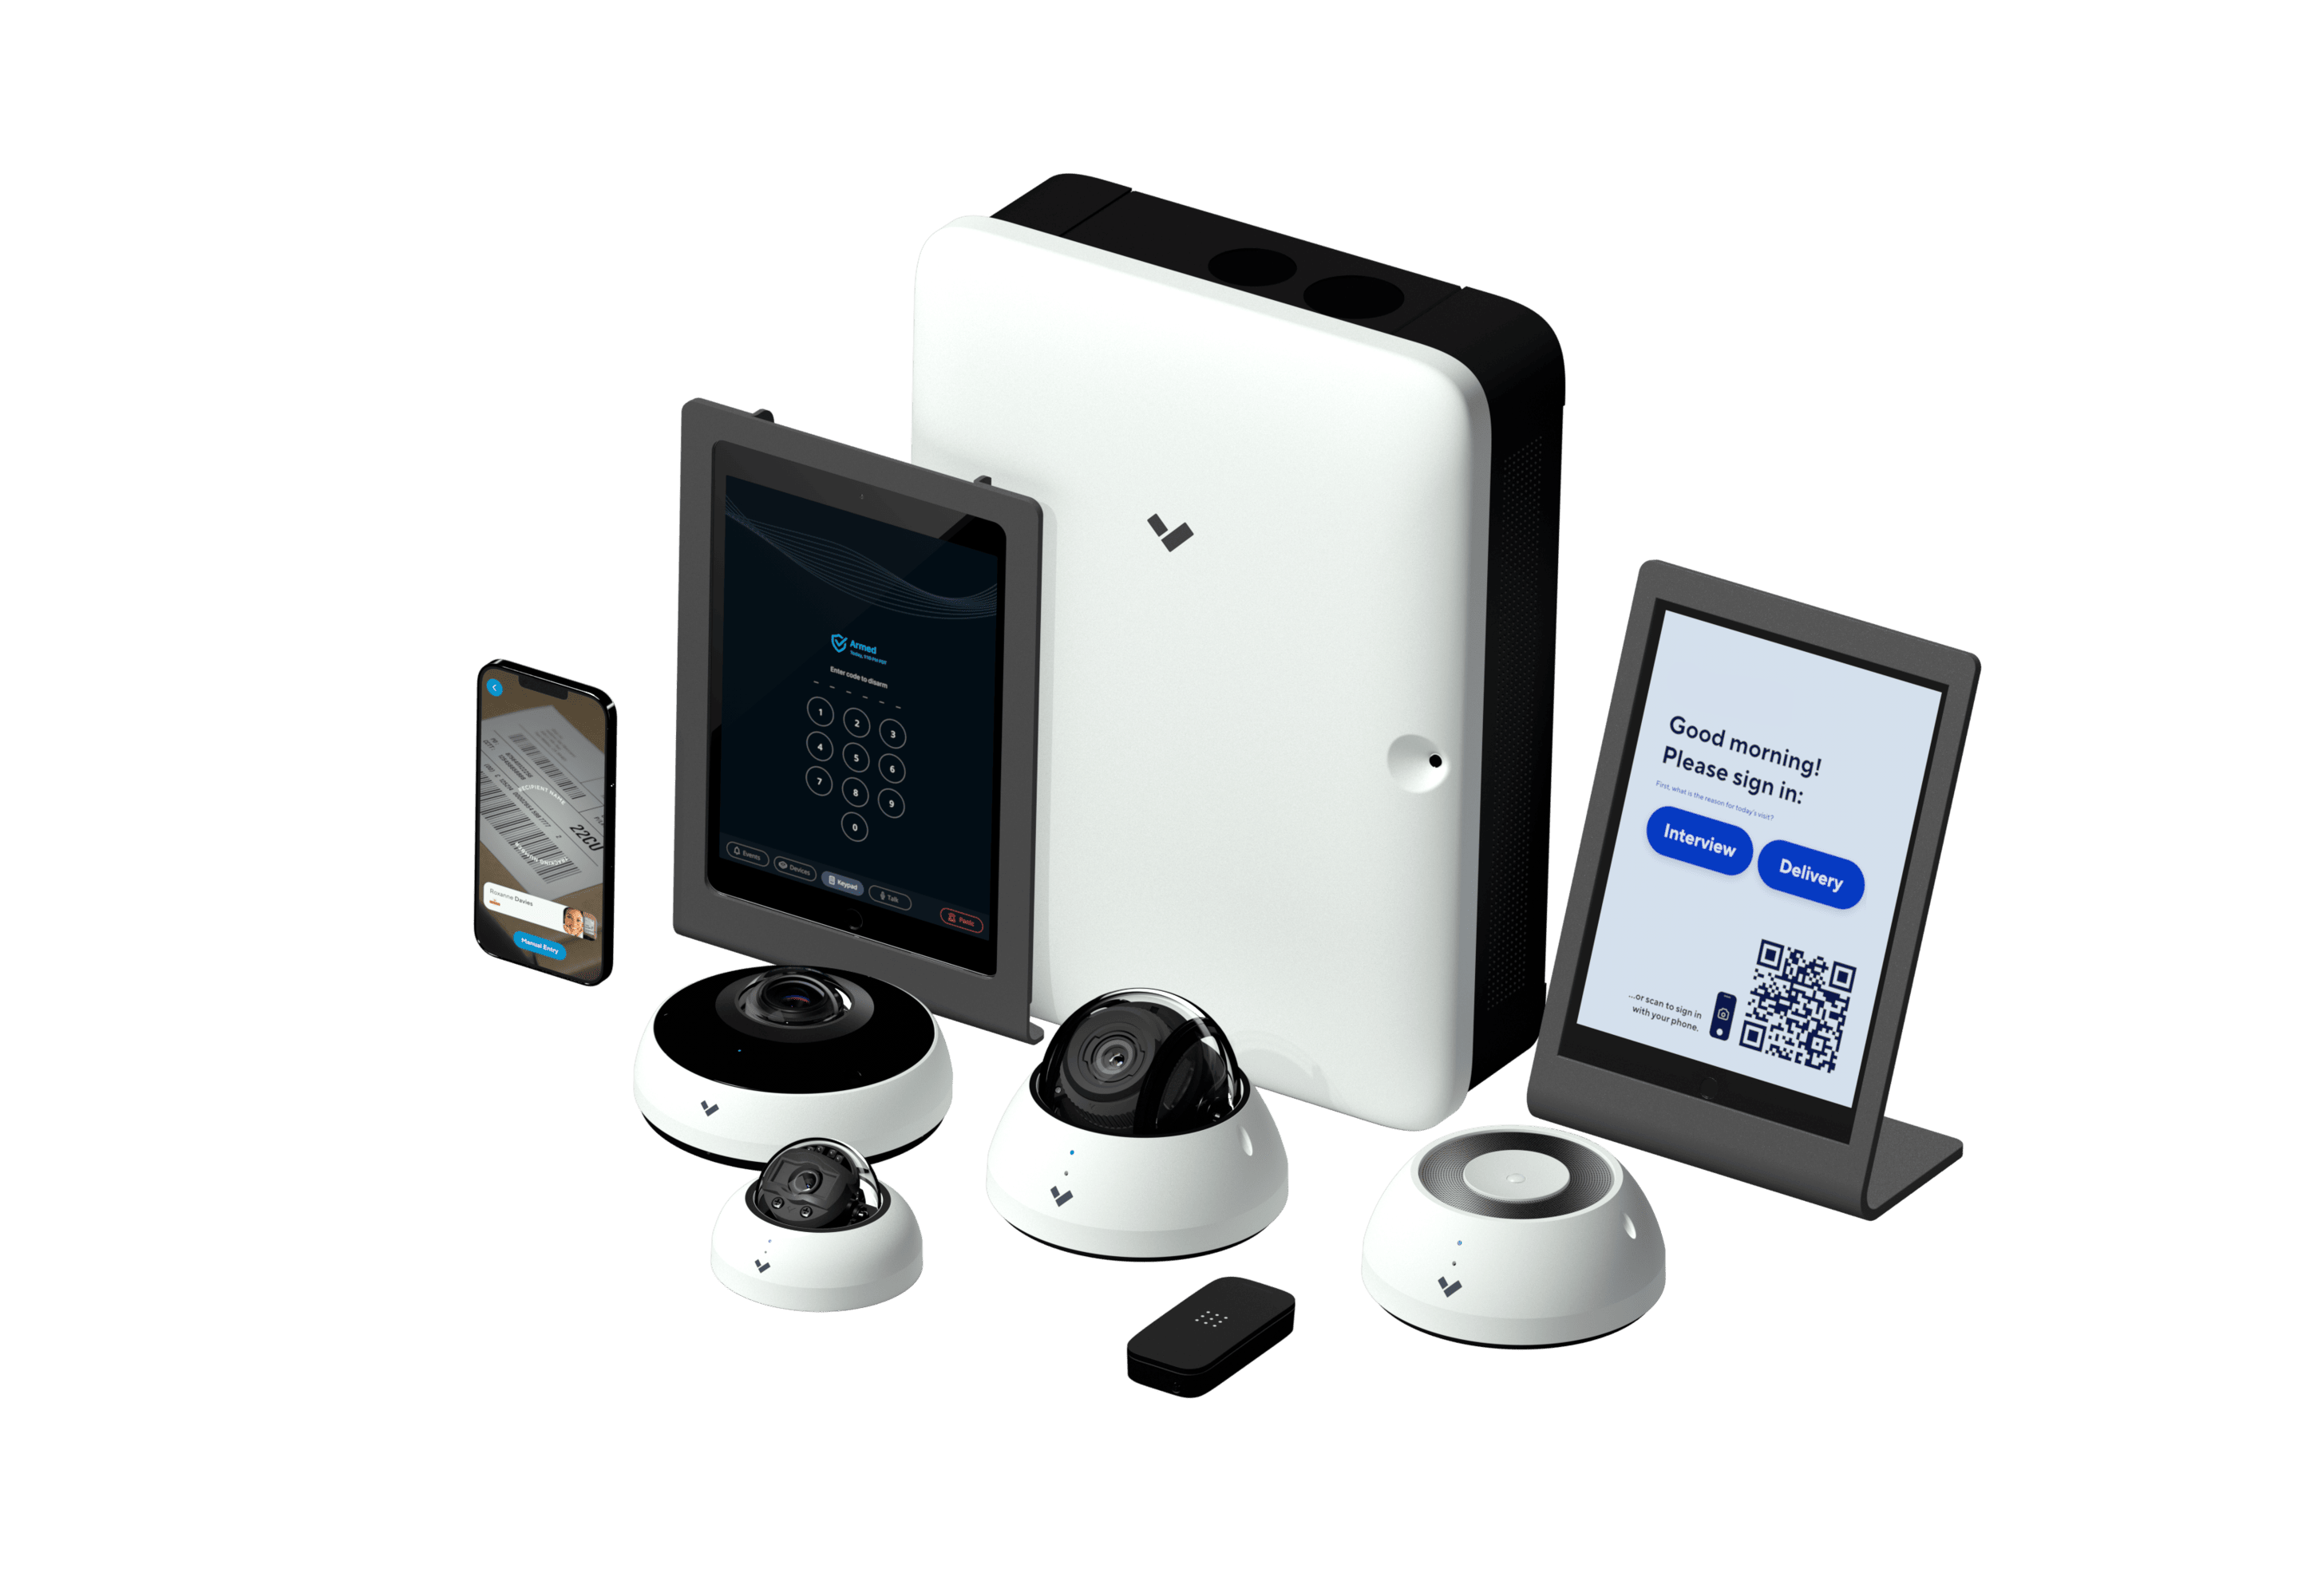 Verkada devices for outdoor security camera systems with night vision